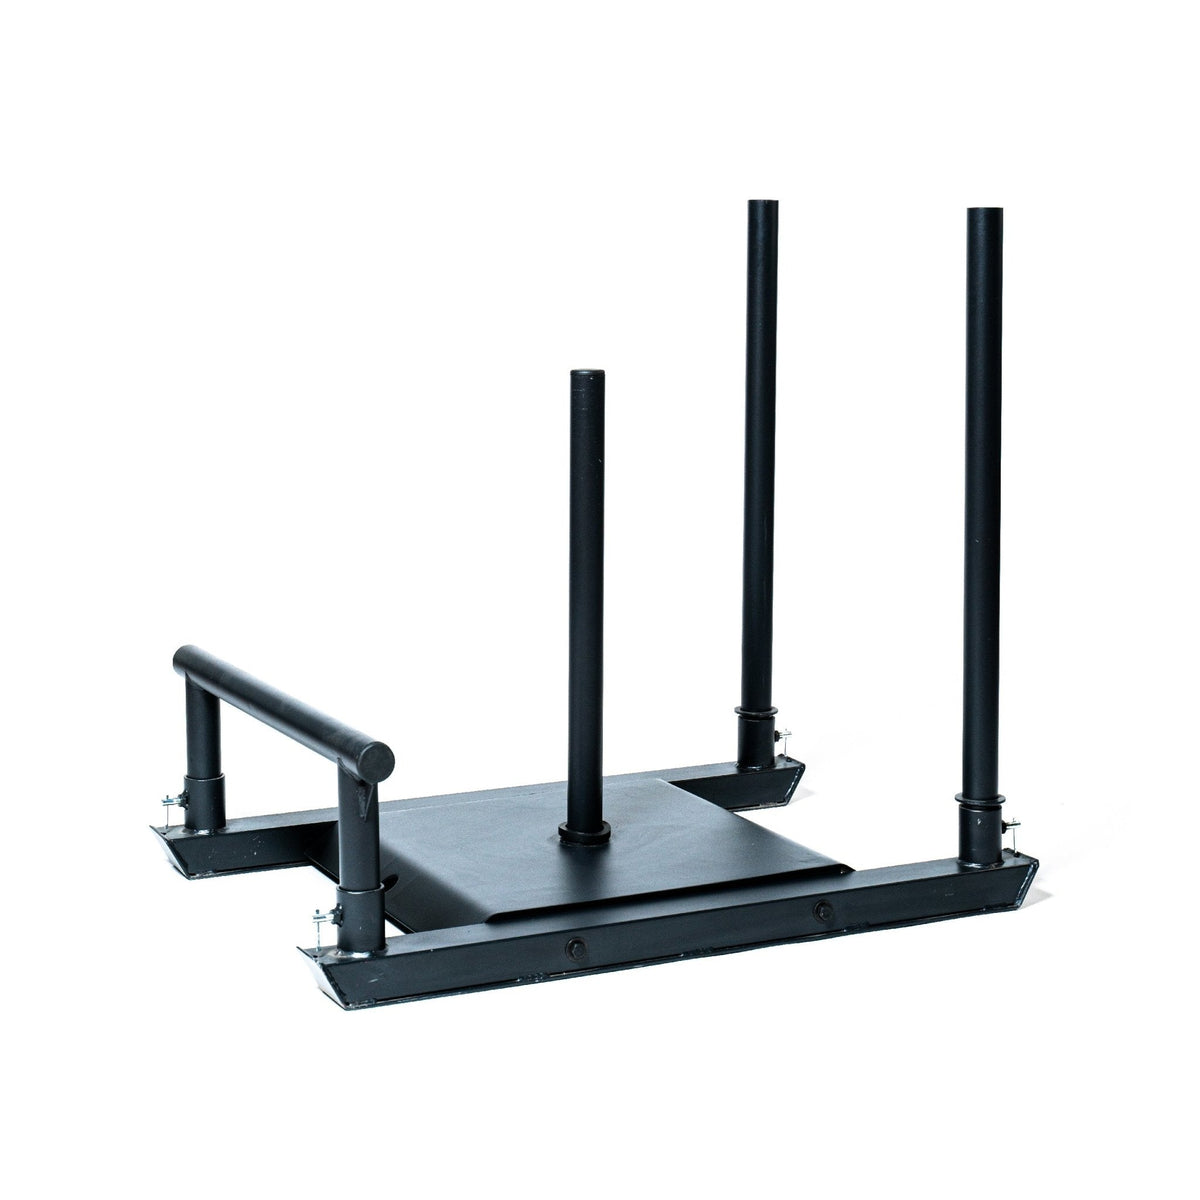 Fitness Experience Gym Sled Black - Fitness Experience